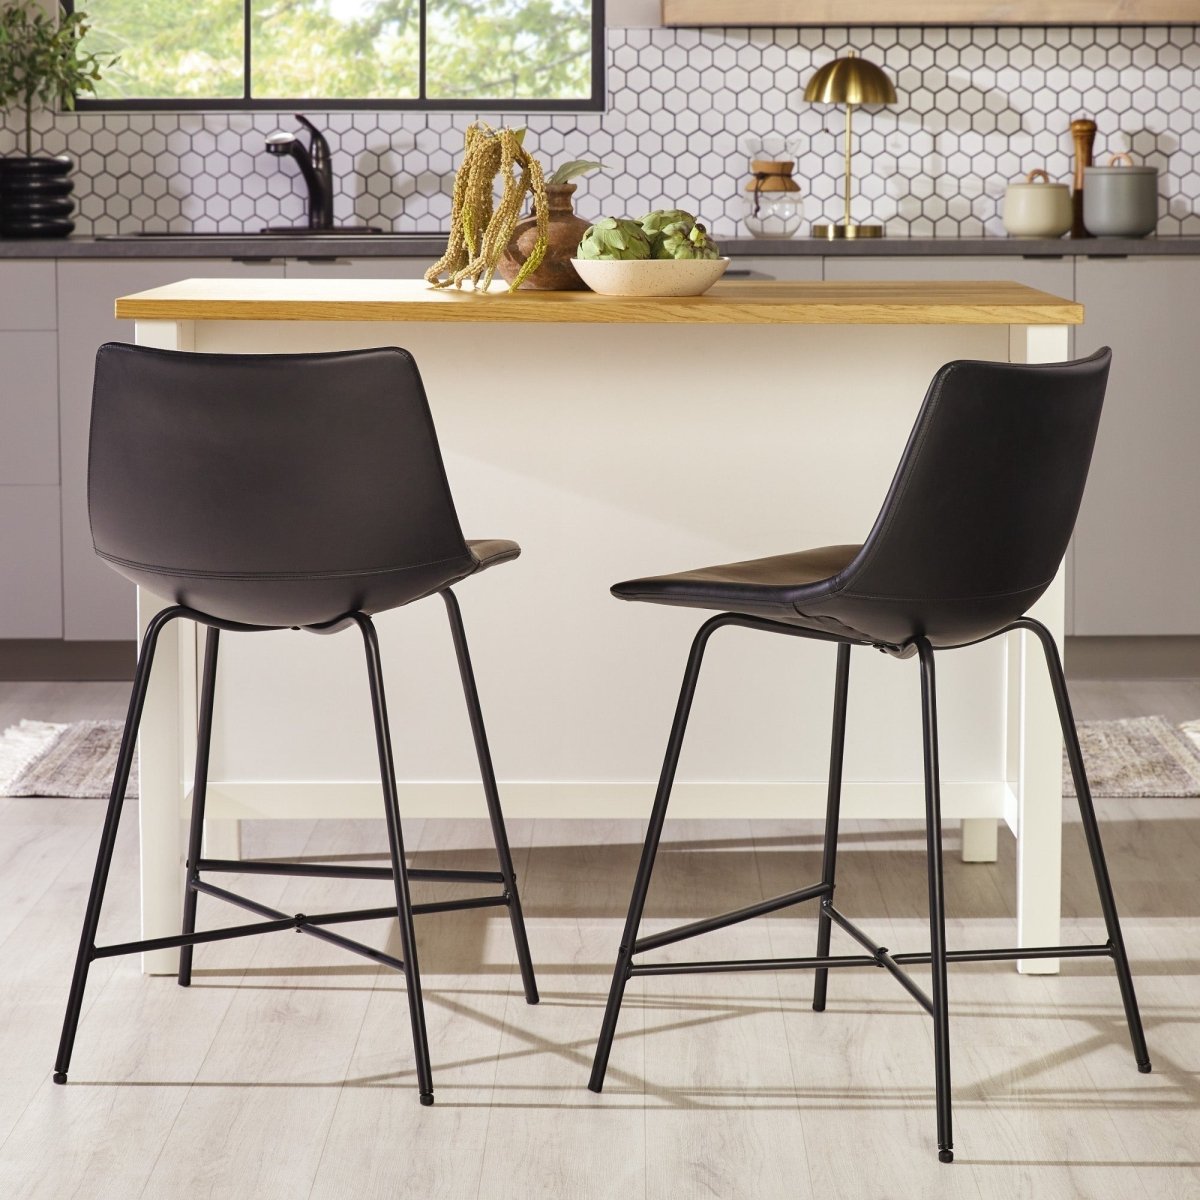 Walker Edison Xuma Modern Upholstered Seating Collection, Dining Chair or Counter Stool - Set of 2 - lily & onyx